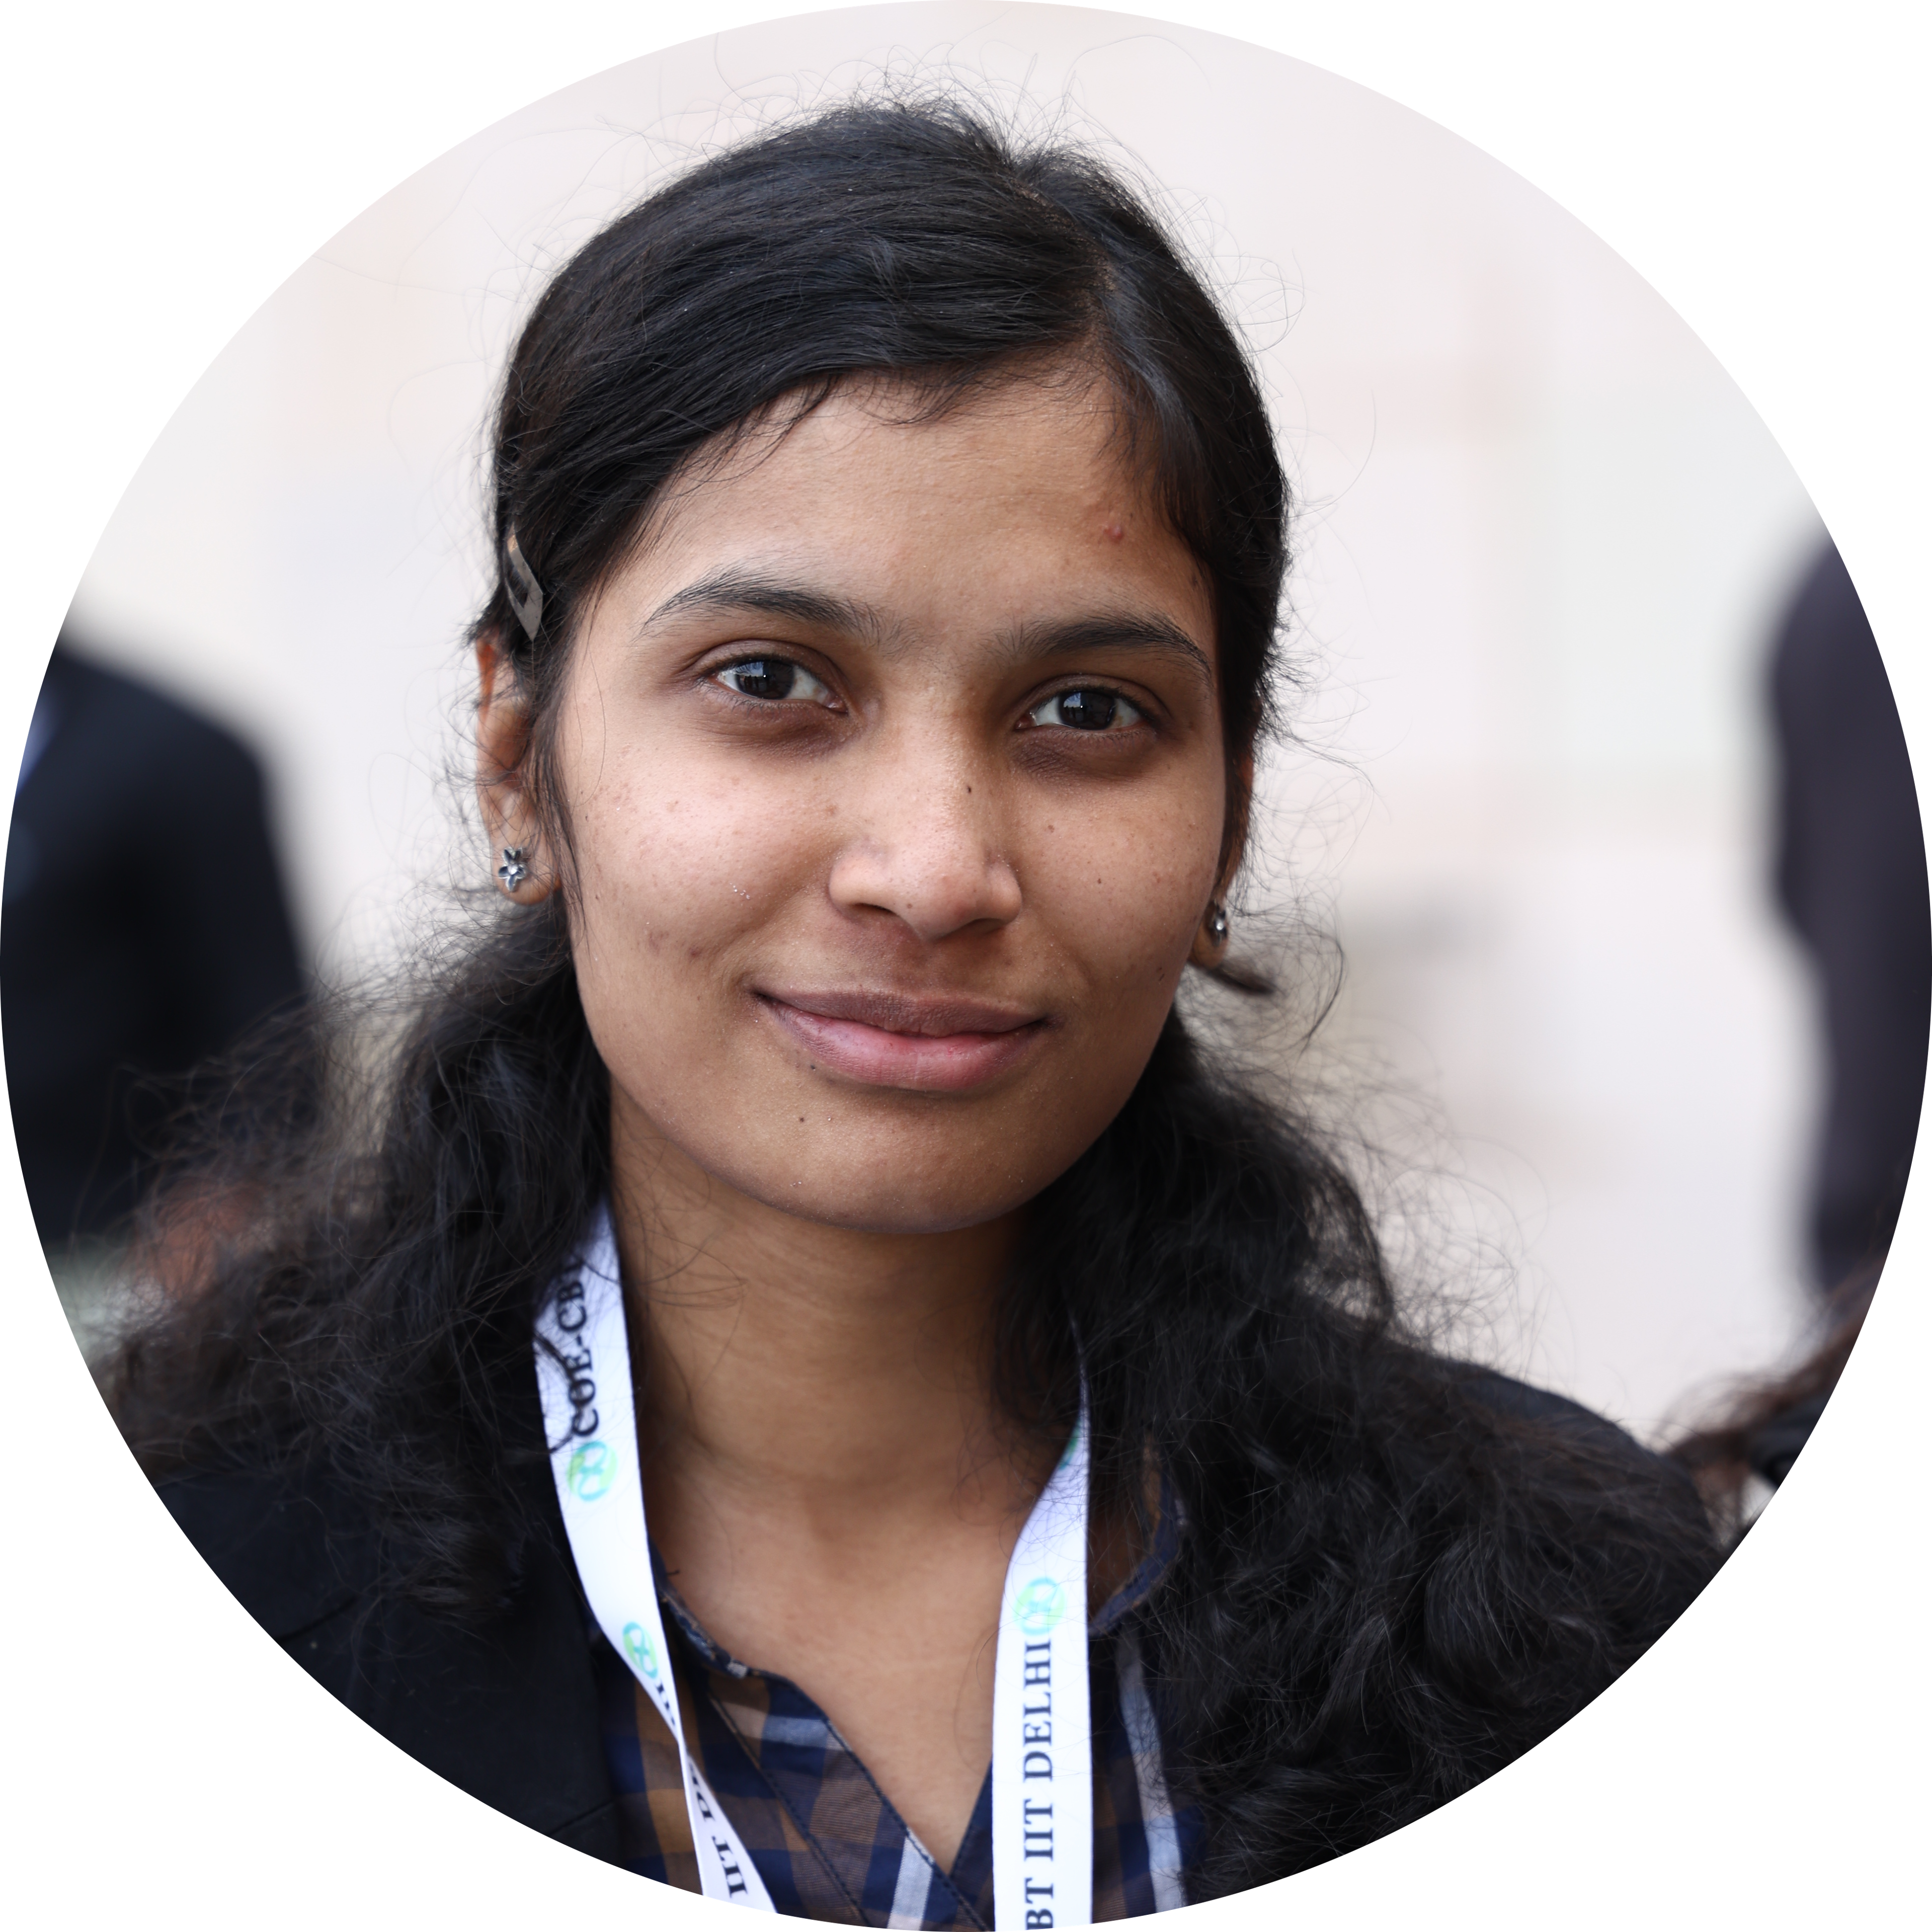 Vineela Peruri is a PhD student in the analytical division at the Centre of Excellence for Biopharmaceutical Technology under the guidance of Professor Anurag S. Rathore, Department of Chemical Engineering, Indian Institute of Technology, Delhi.